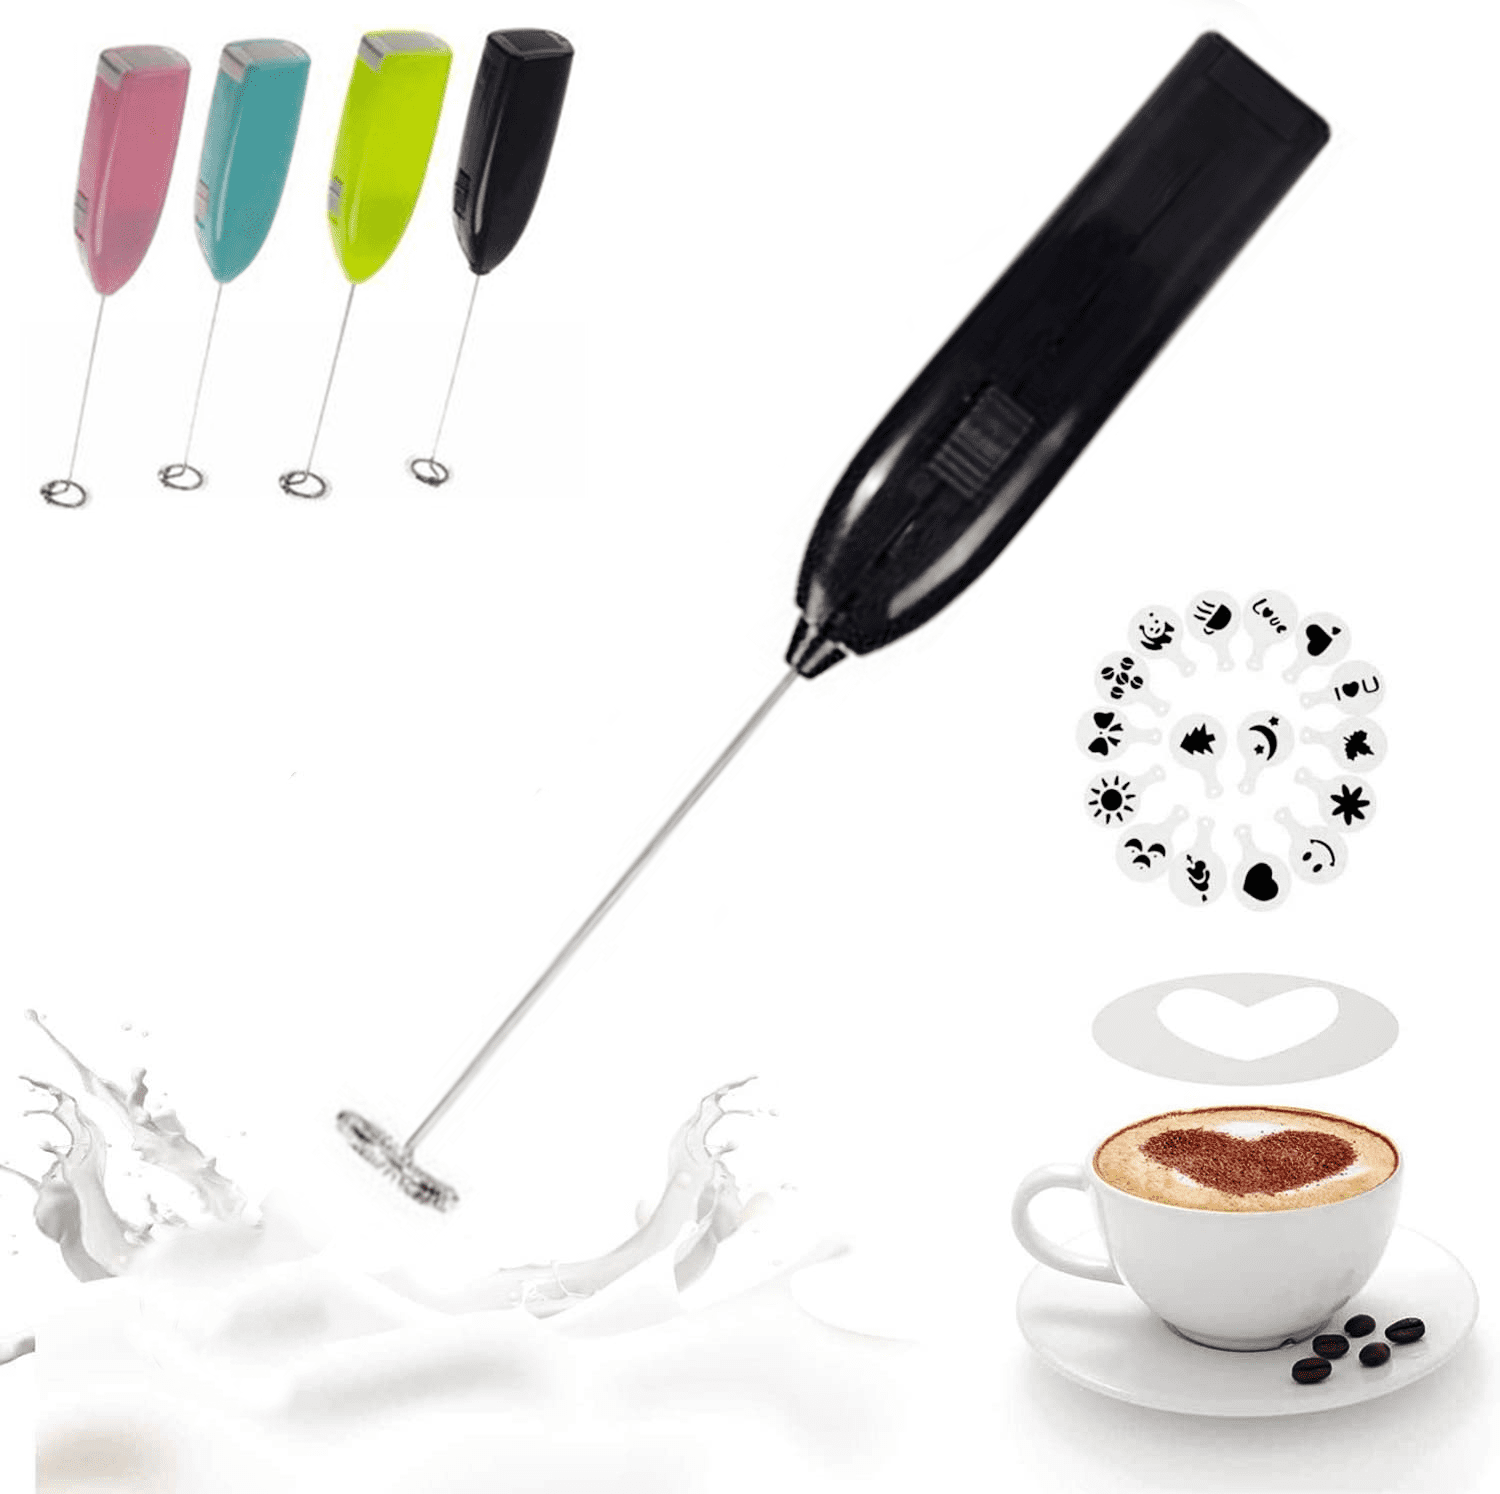 Hot Drinks Milk Frother Foamer Whisk Mixer Stirrer Egg Beater Electric Mini Handle Mini Hand Mixer Electric Mini Mixer Mini Mixer Black Battery Powered Stirrer 